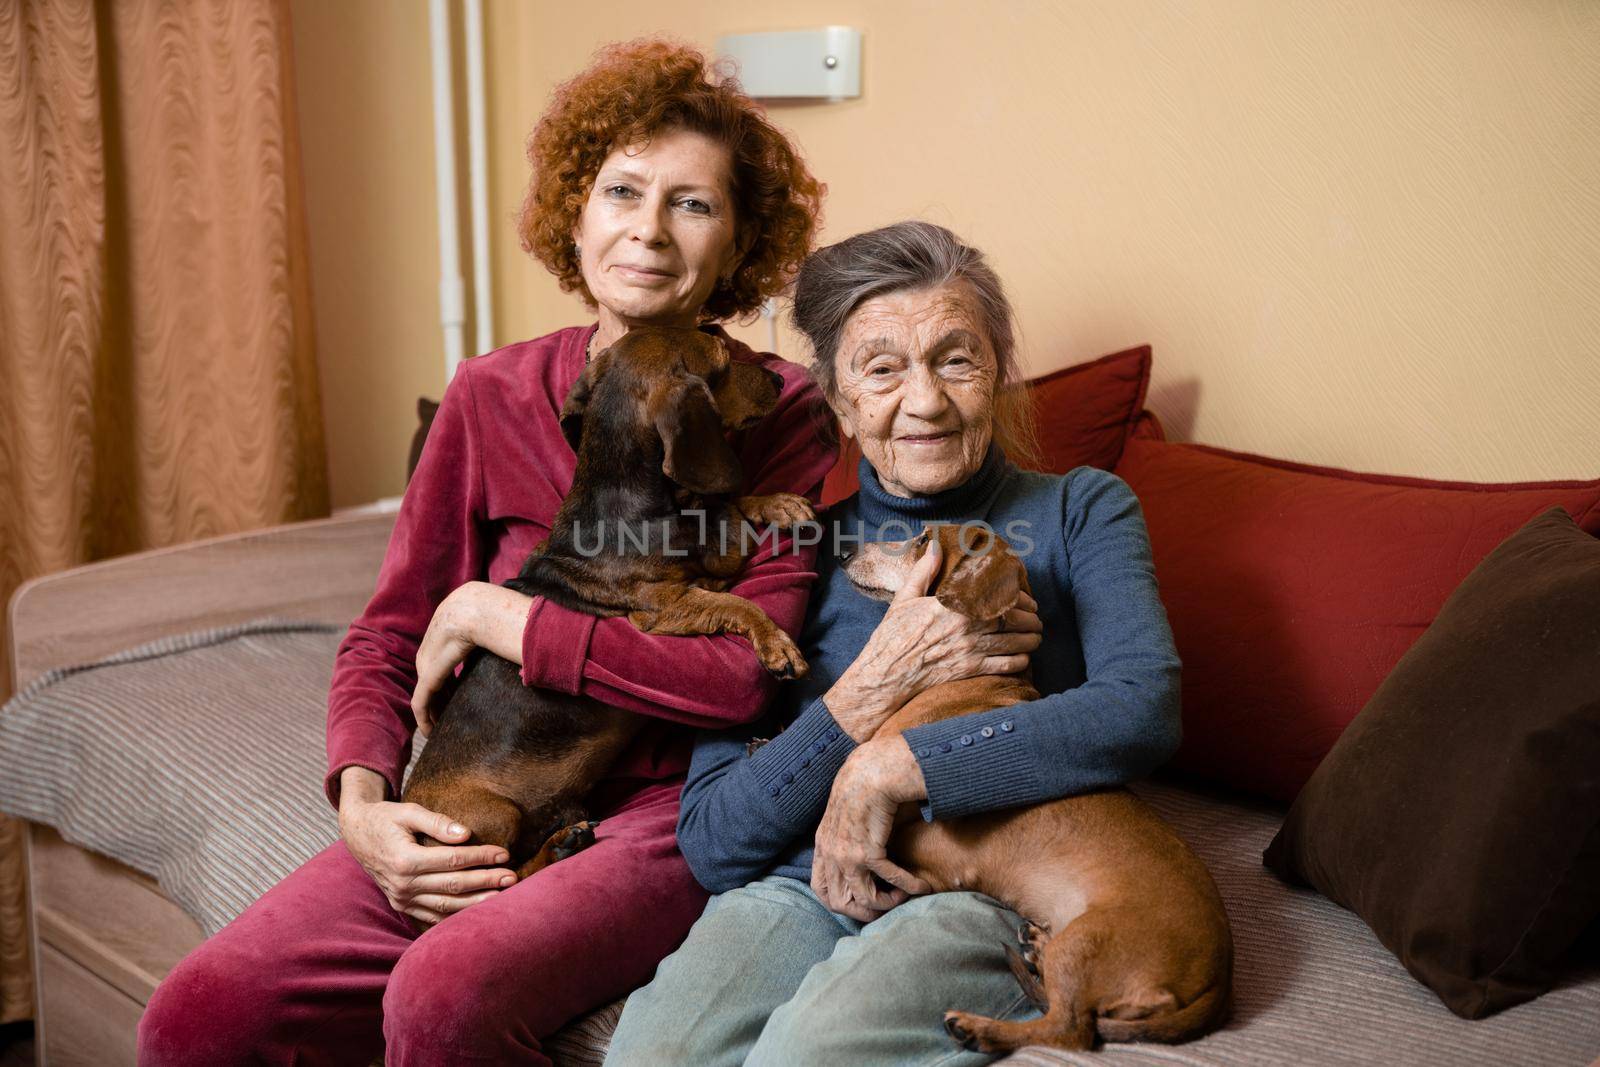 The theme is animal therapy, caring for elderly with dementia and Alzheimer's disease. Adult women spend time with elderly mother and pets dogs to bring joy and pleasure, affection for loved ones by Tomashevska